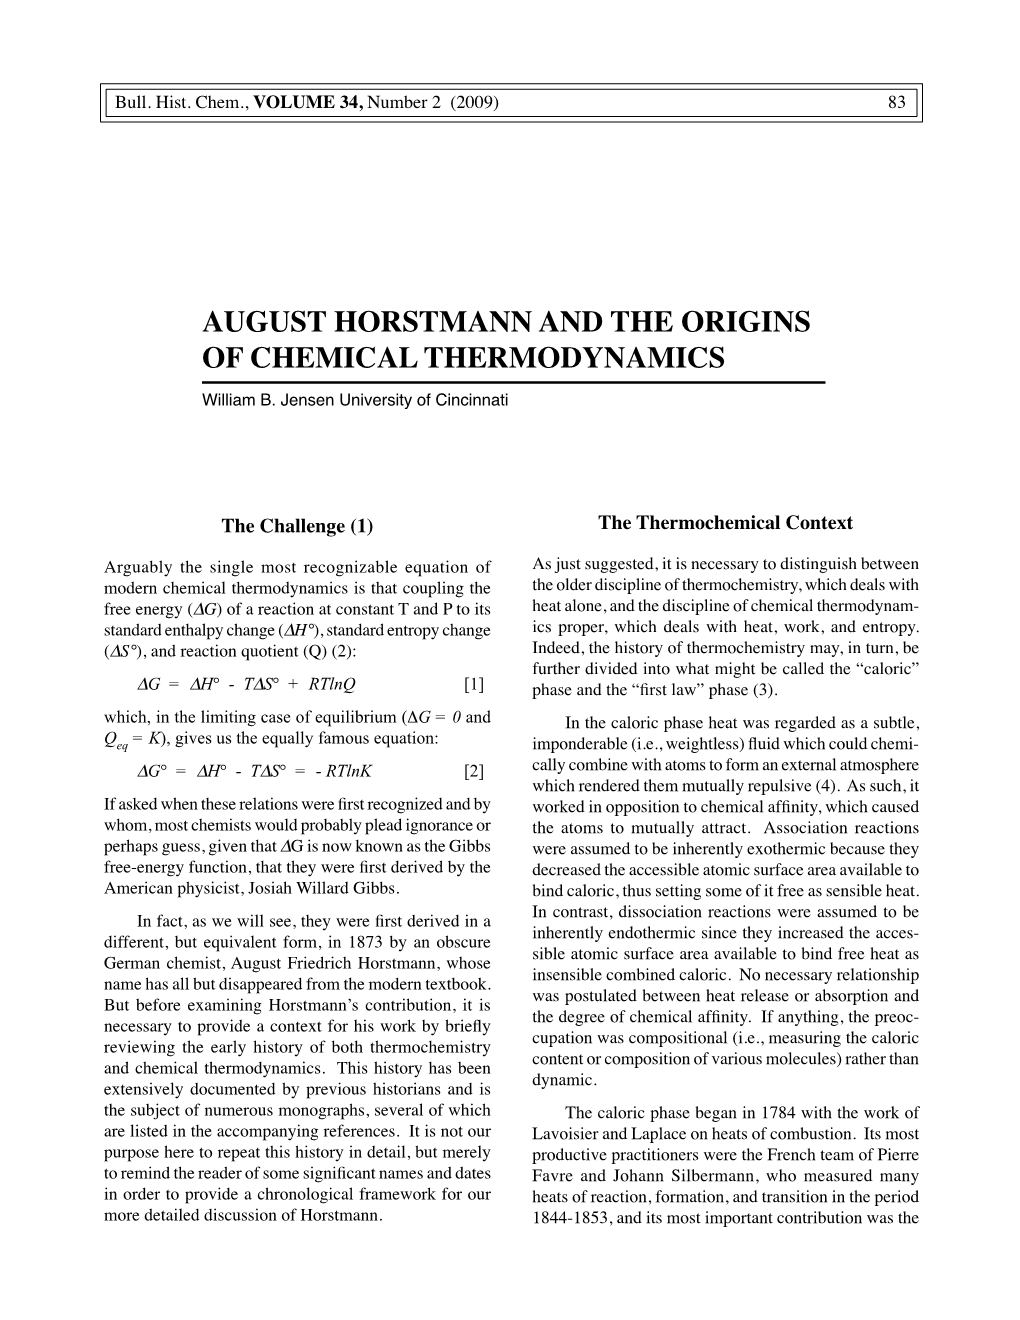 August Horstmann and the Origins of Chemical Thermodynamics